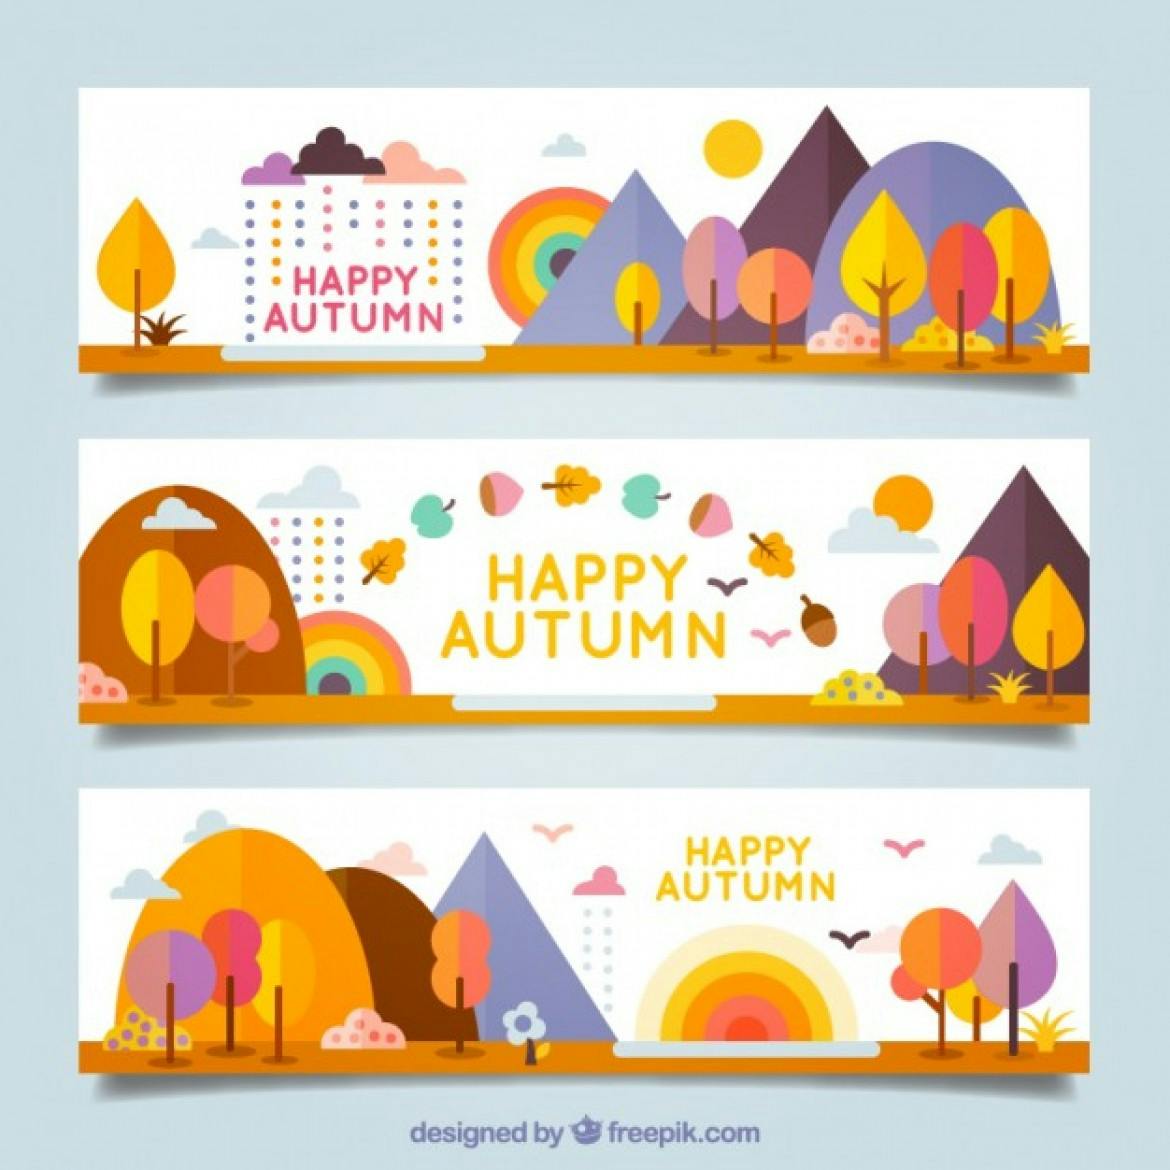 wpid-colorful-happy-autumn-banners_23-2147521387-1170x1170